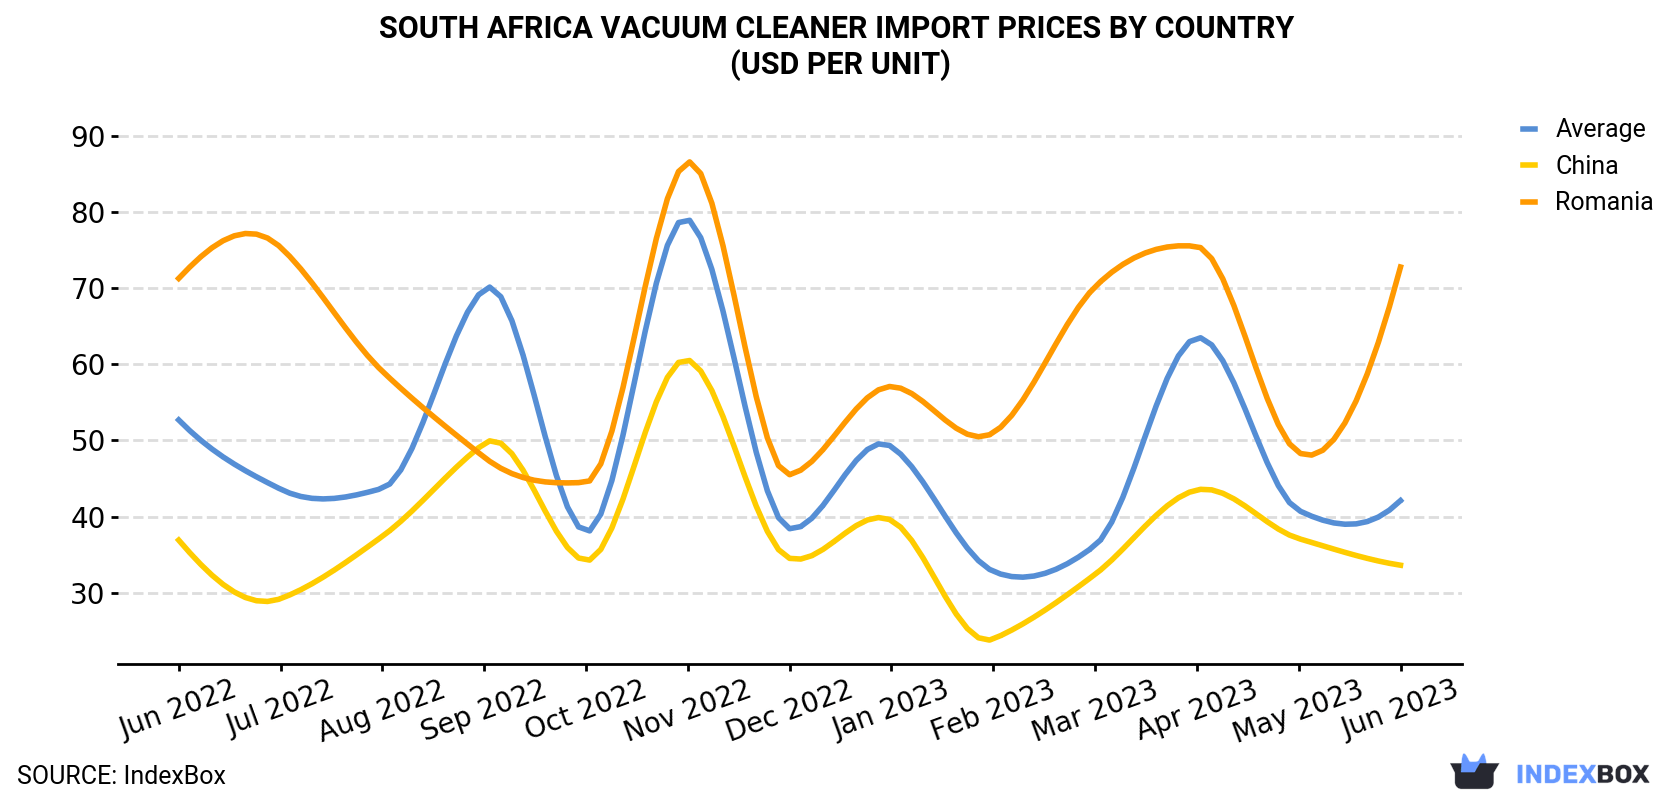 South Africa Vacuum Cleaner Import Prices By Country (USD Per Unit)